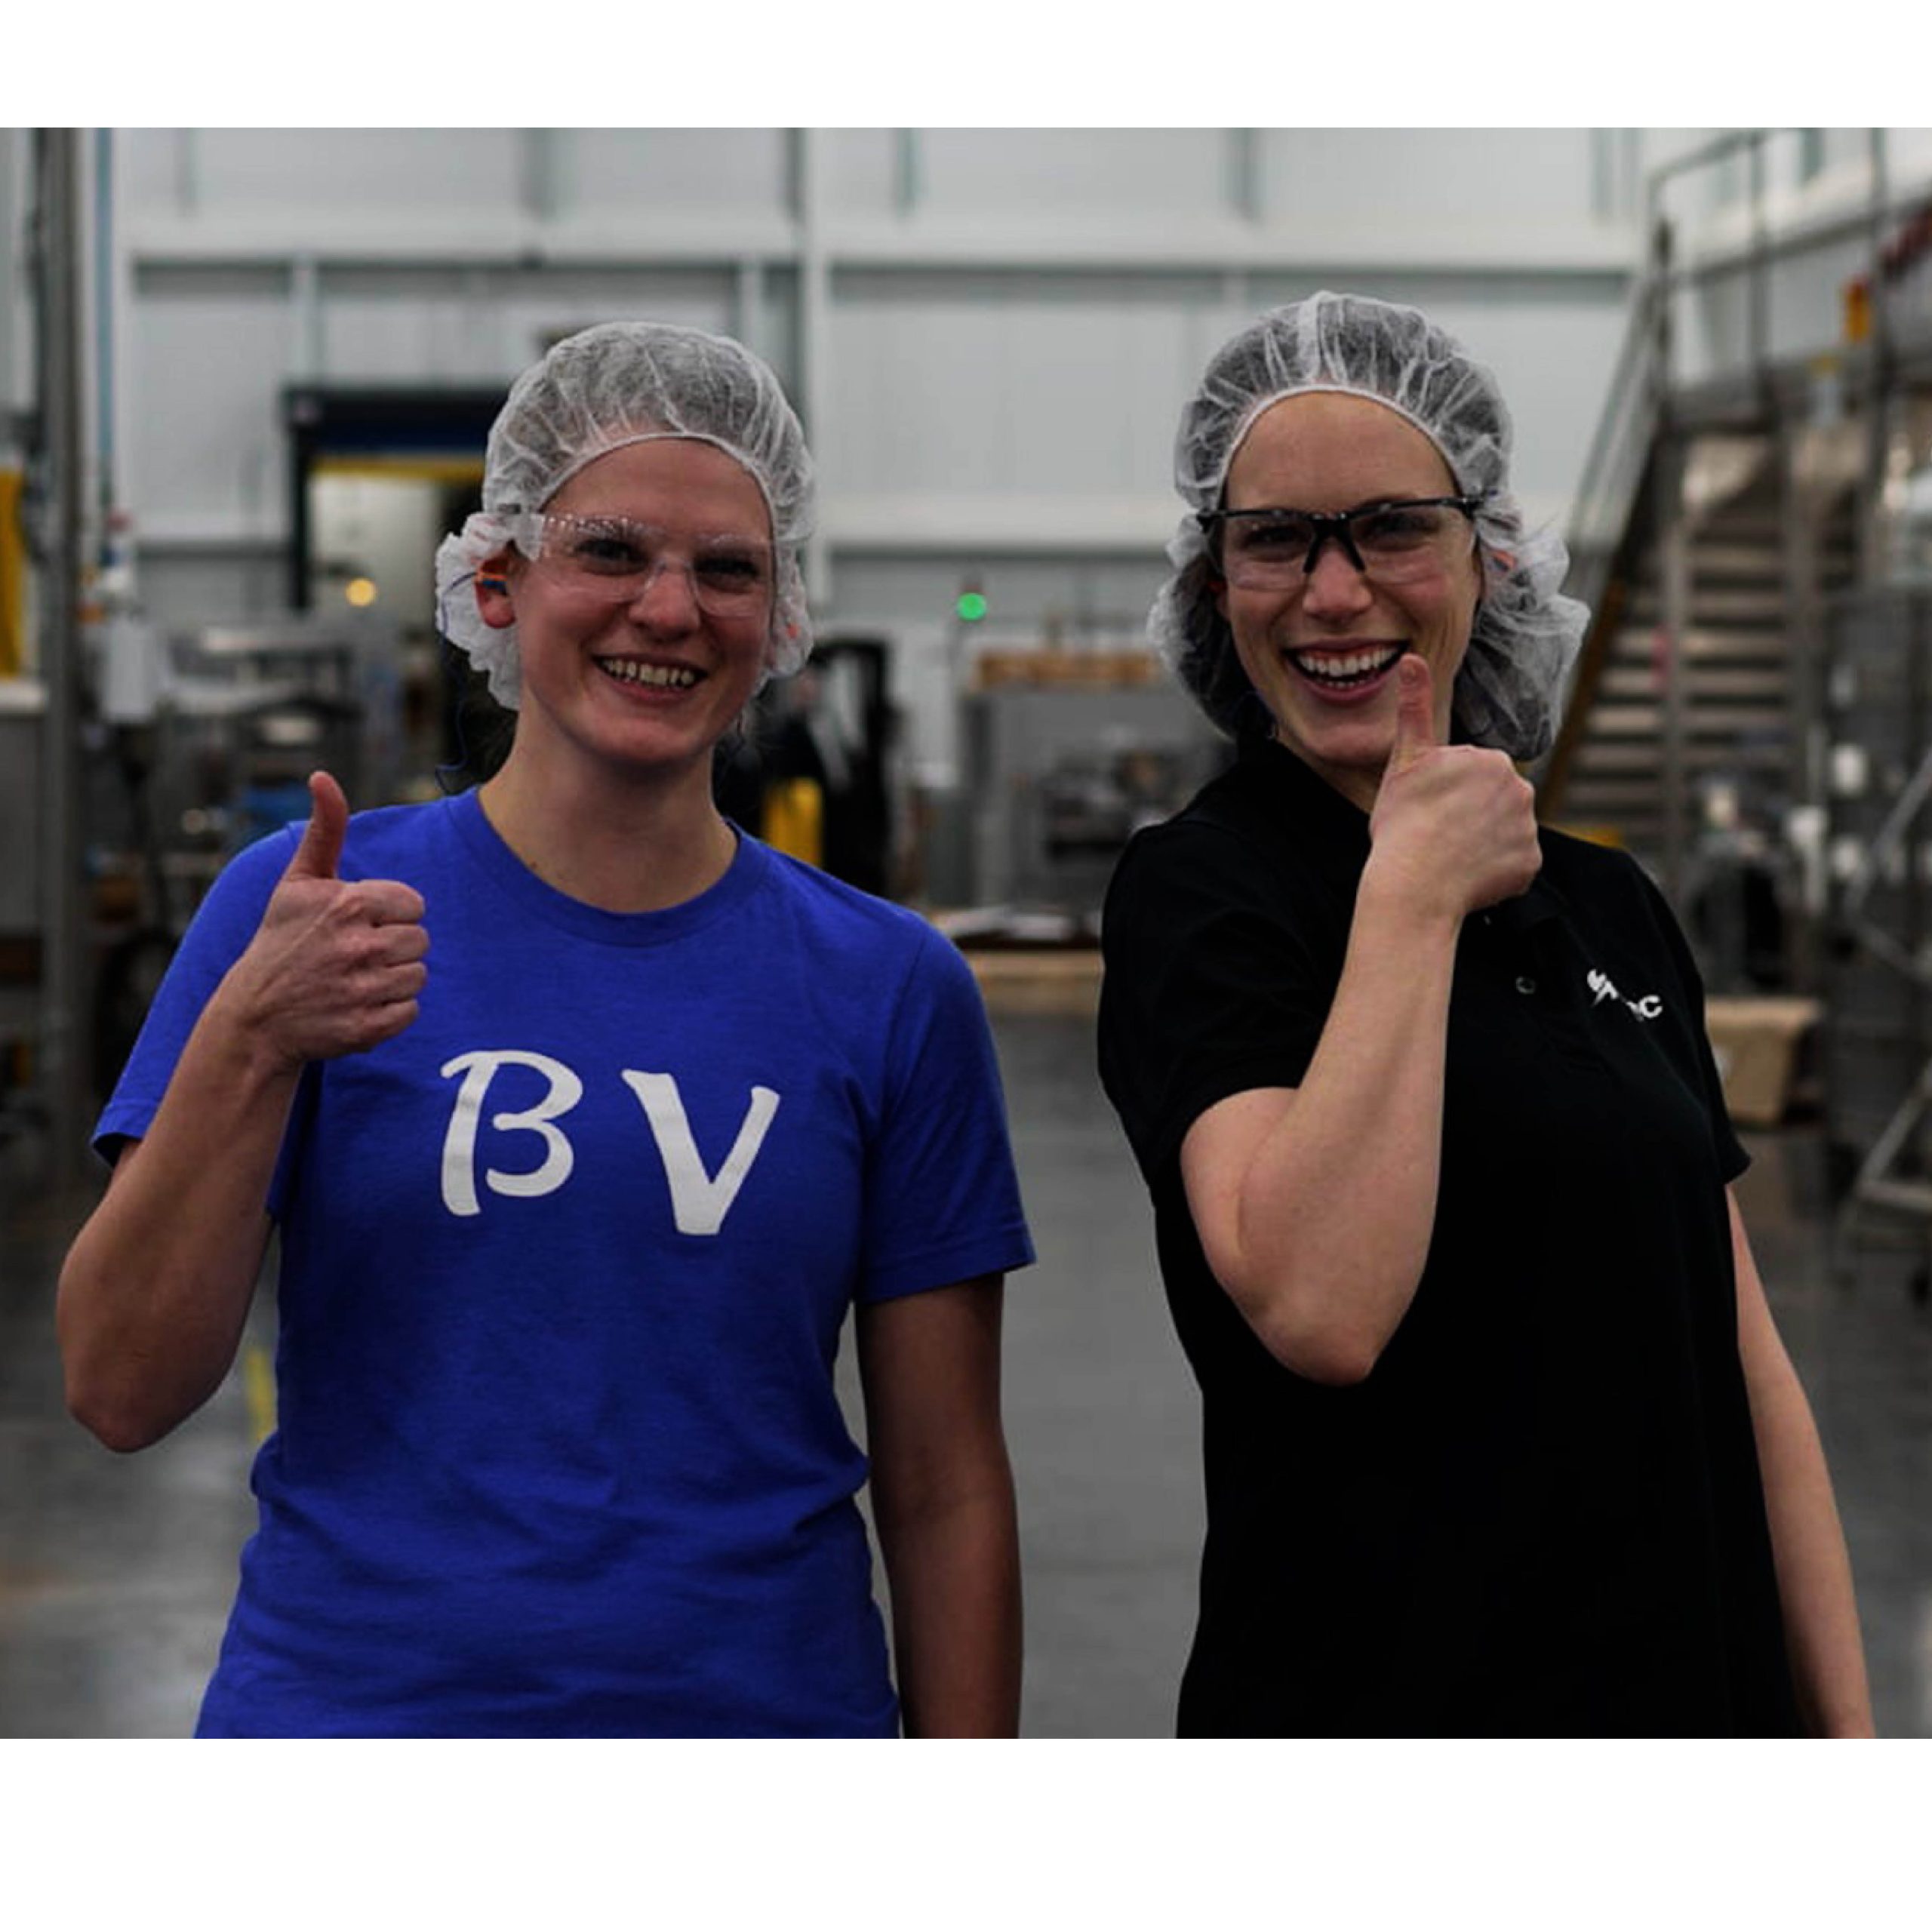 two cqc workers giving a thumbs up in the manufacturing plant